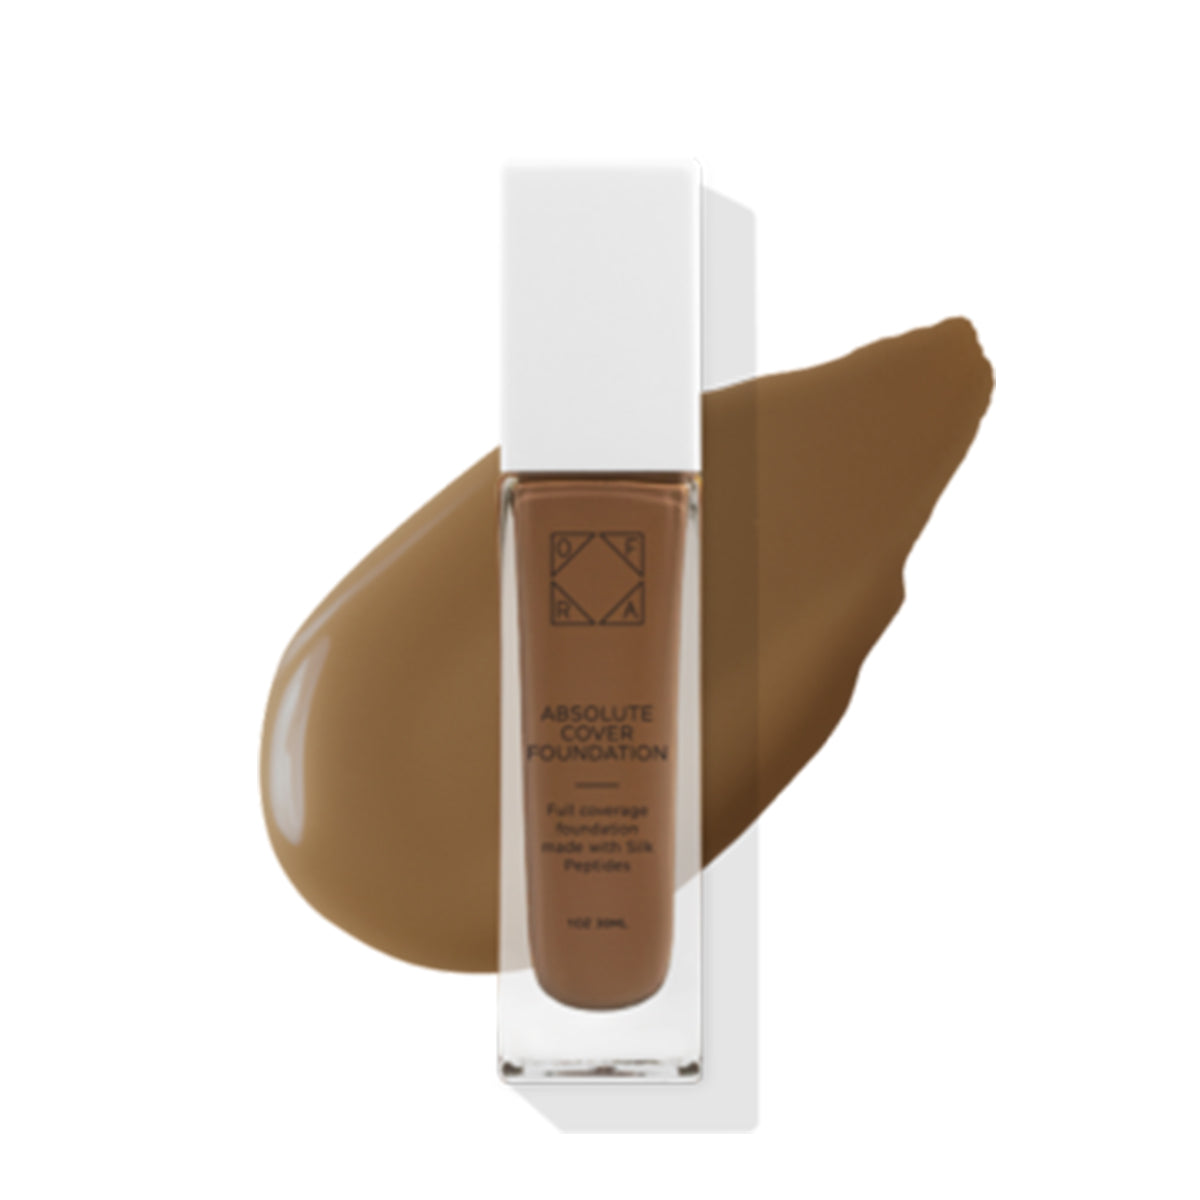 Absolute Cover Silk Peptide Foundation #8.5